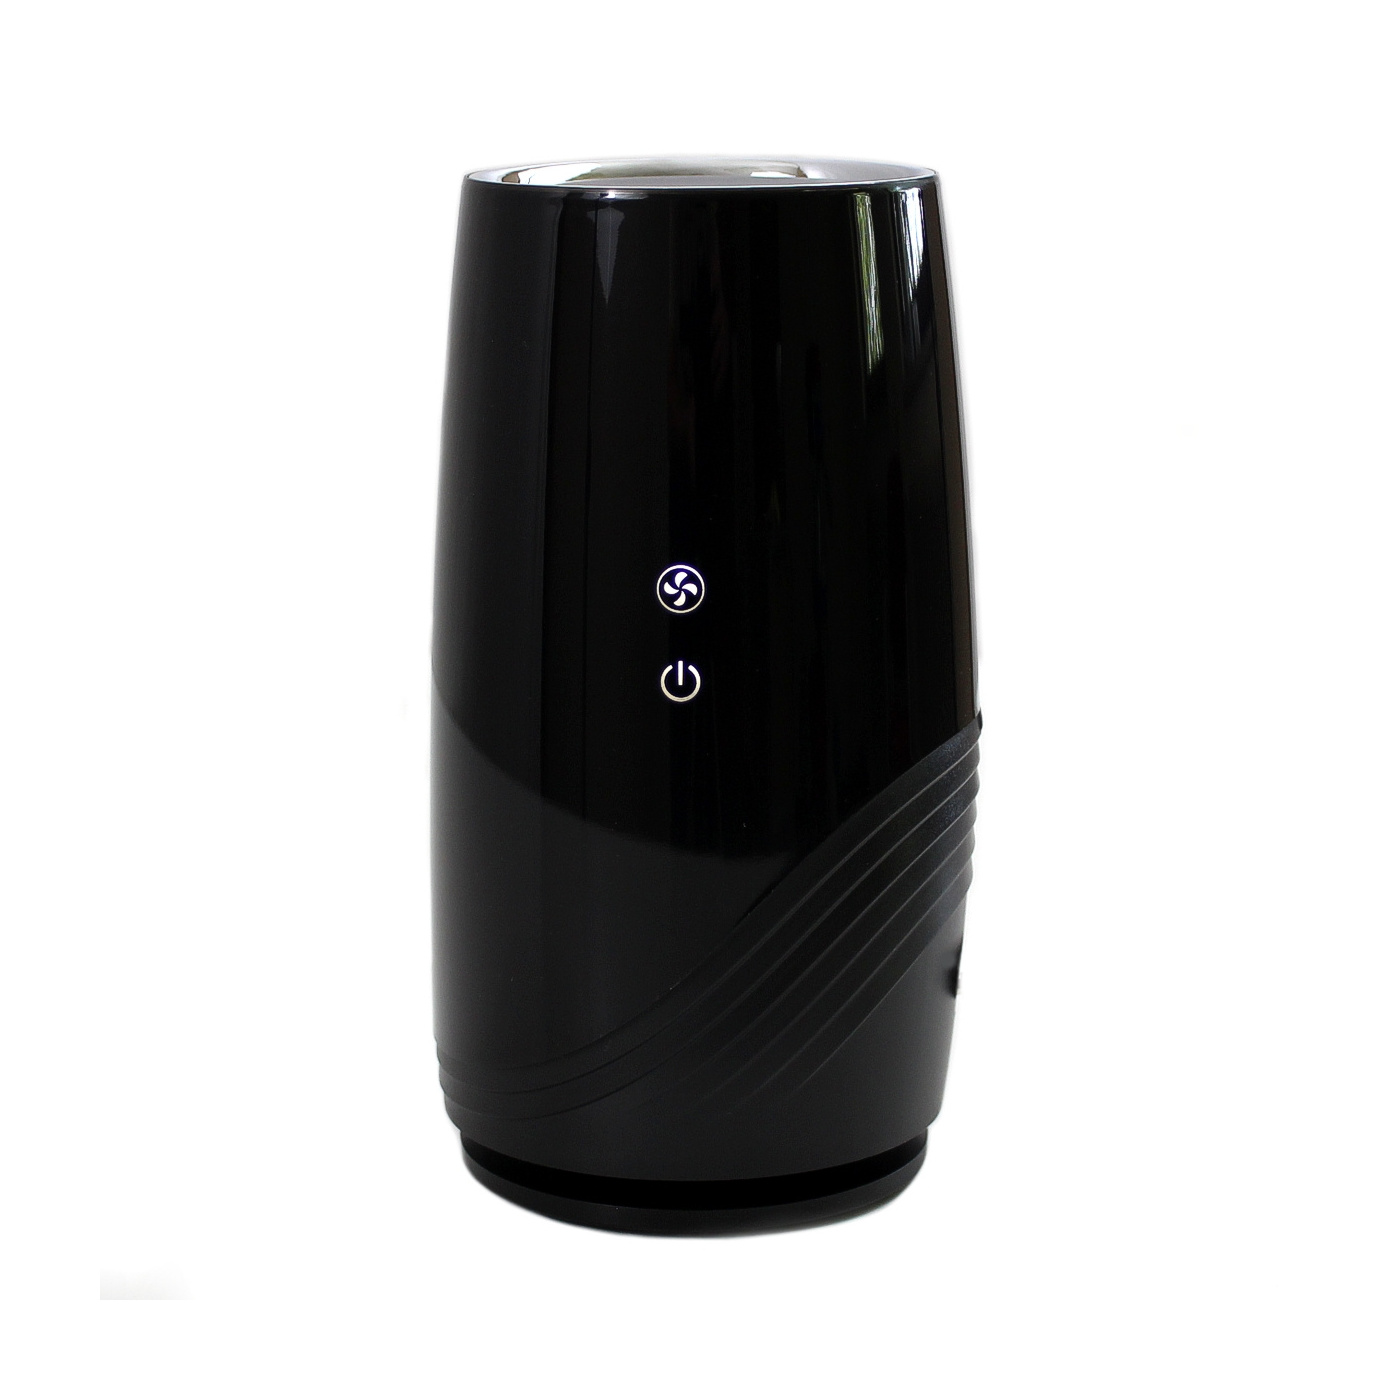 Desktop air purifier with USB power supply